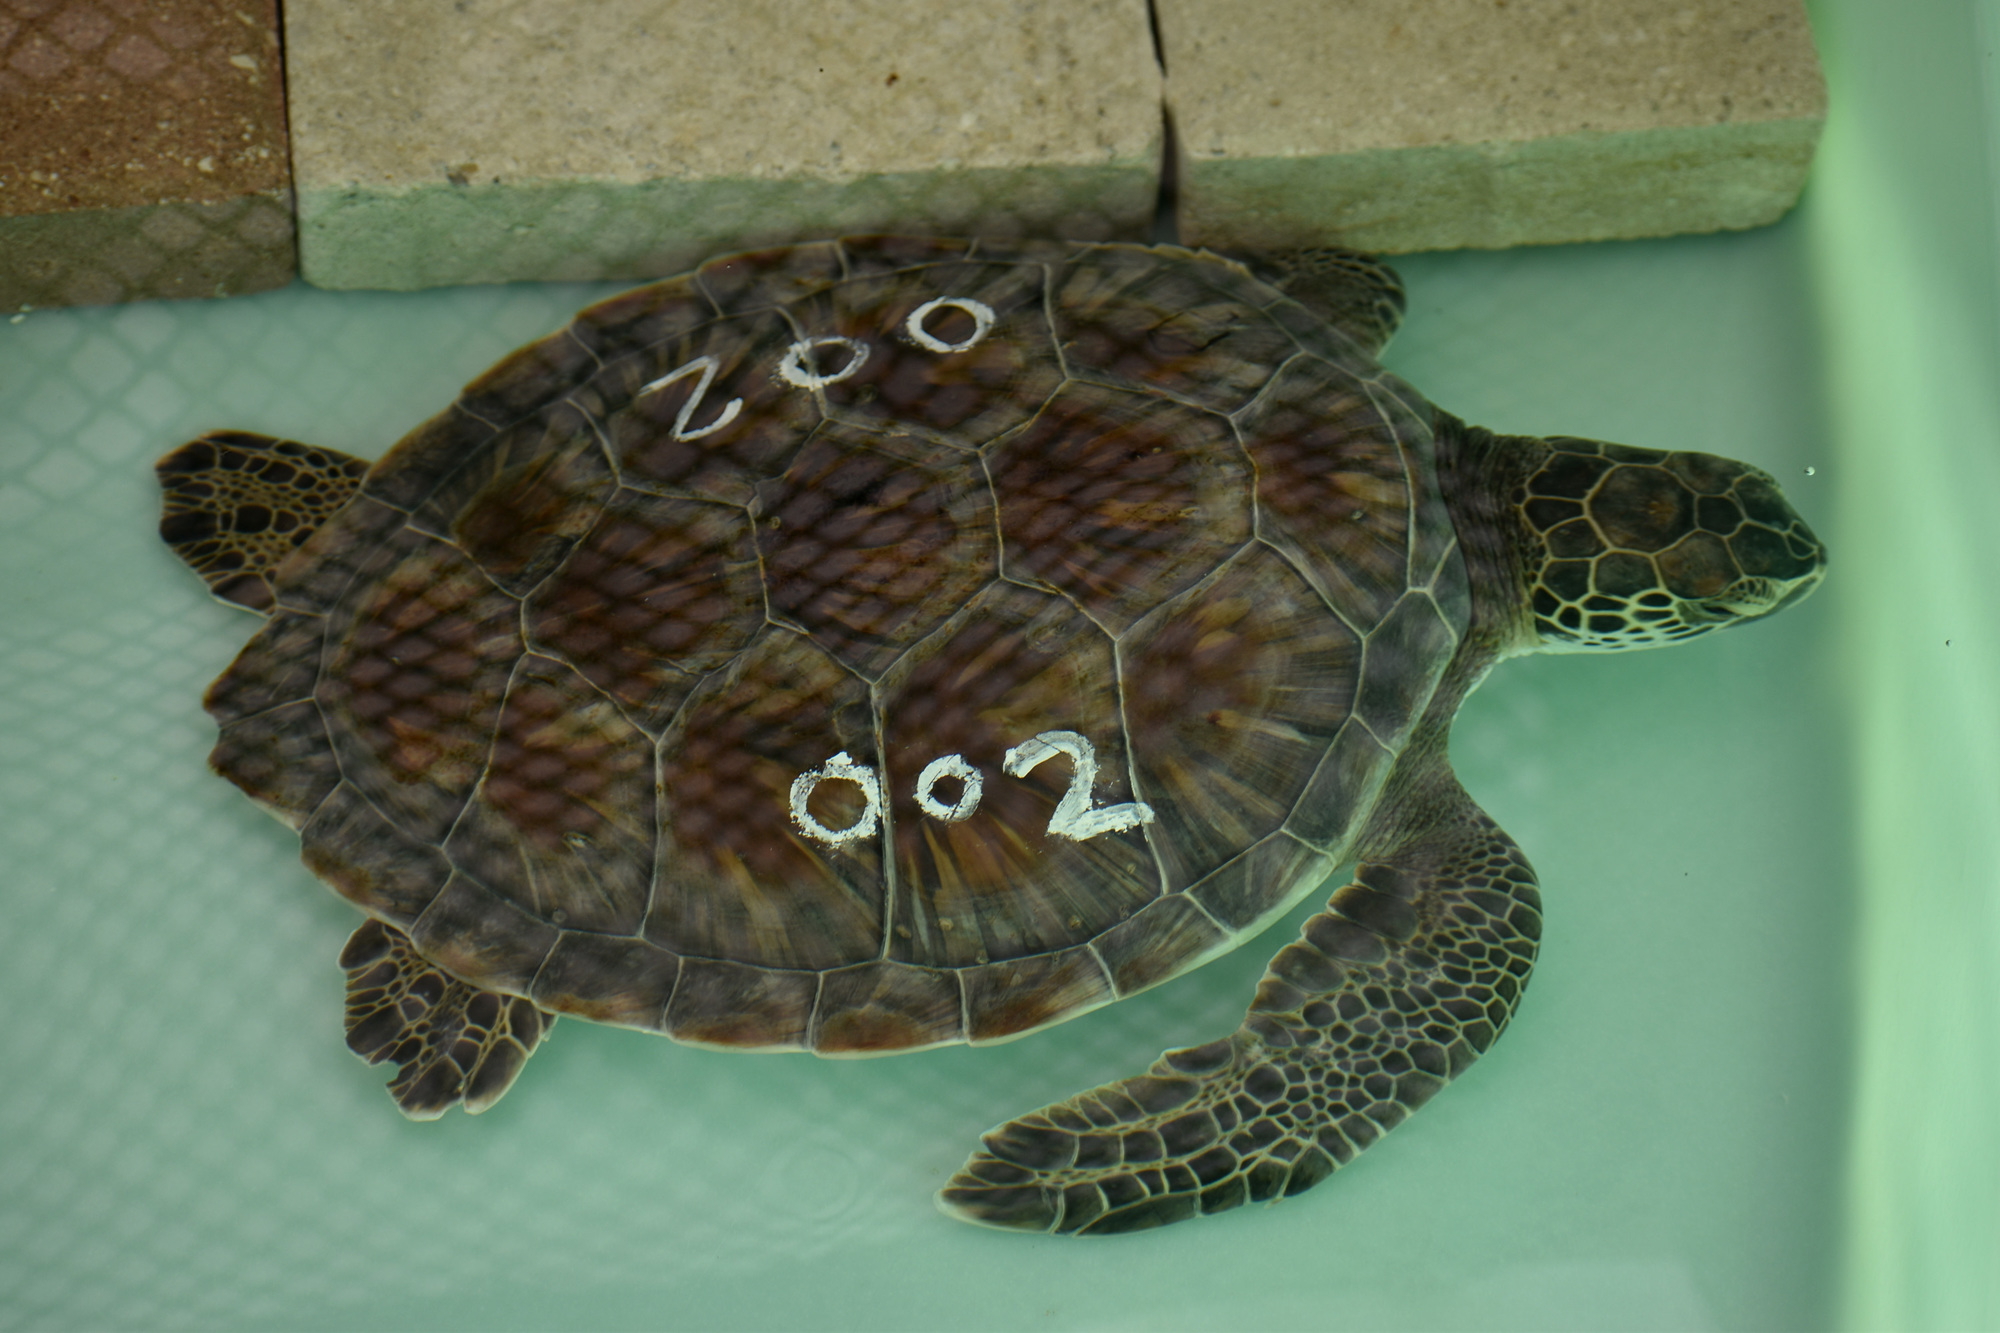 Dreidel, the only green sea turtle to come to Mote from  NEAQ, swims in a tank. Numbers were painted on the turtles' shells with nail polish as a way of identifying them.